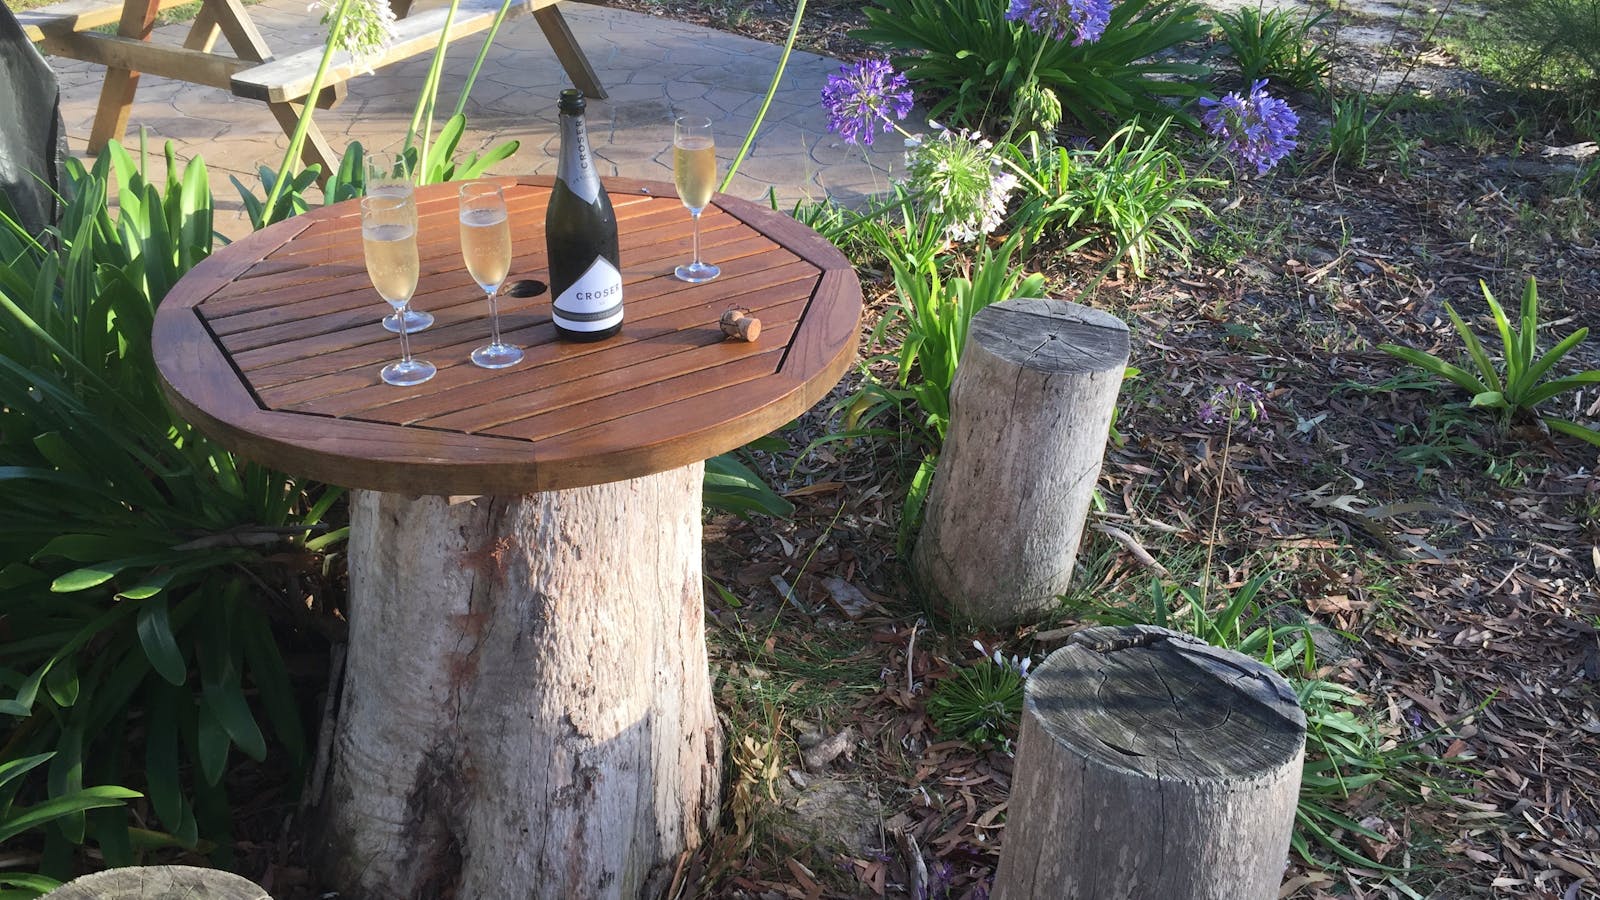 Enjoy breakfast or drinks or a BBQ under the gumtrees.